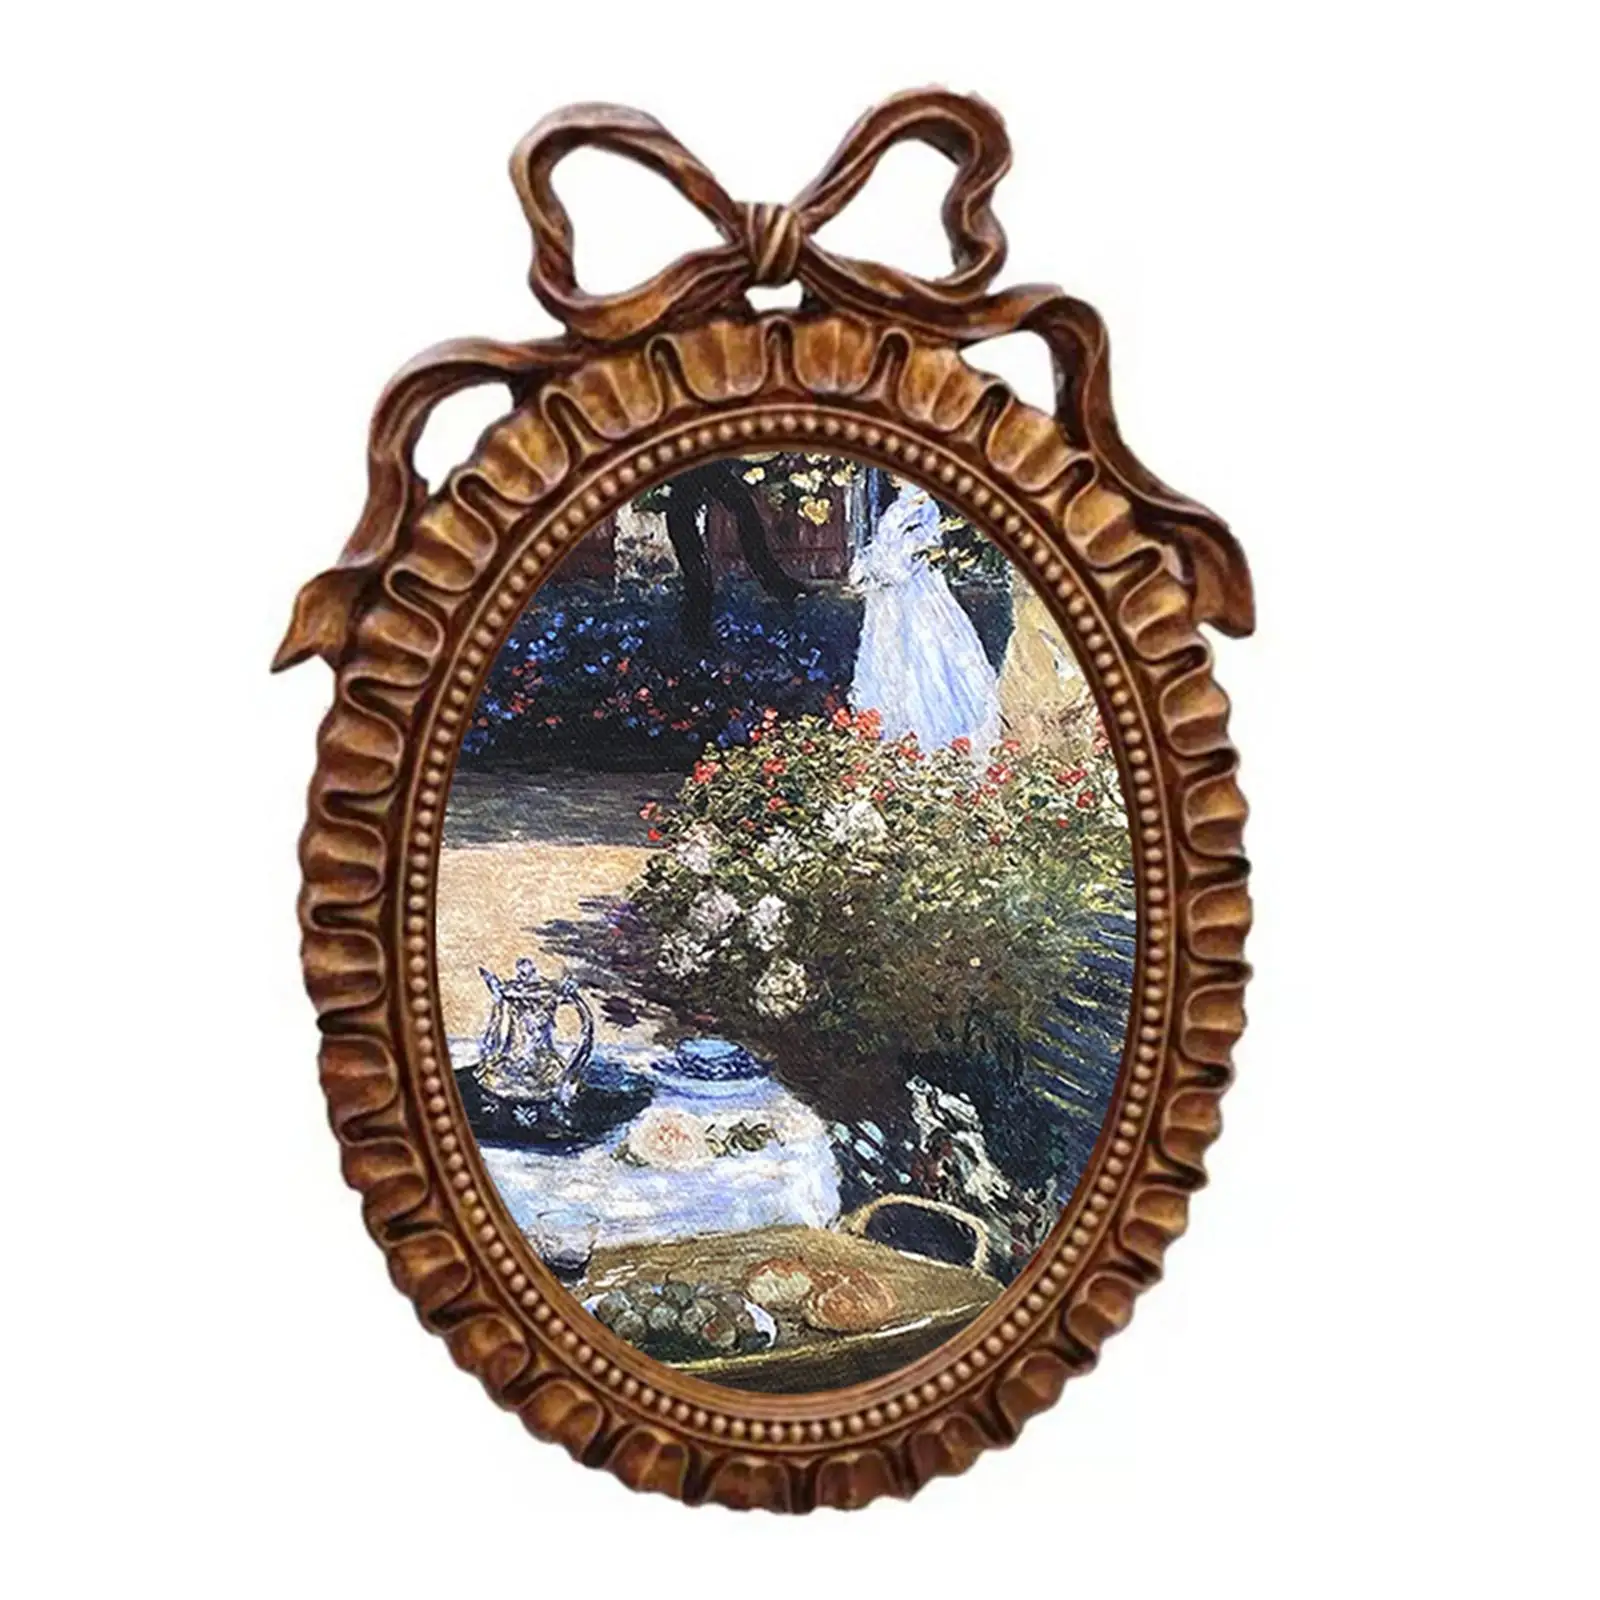 Old Fashioned Resin Oval Photo Display Frame, Wall Desktop for Home Decor Photo Gallery Art Ornament Multi Occasions Decoration